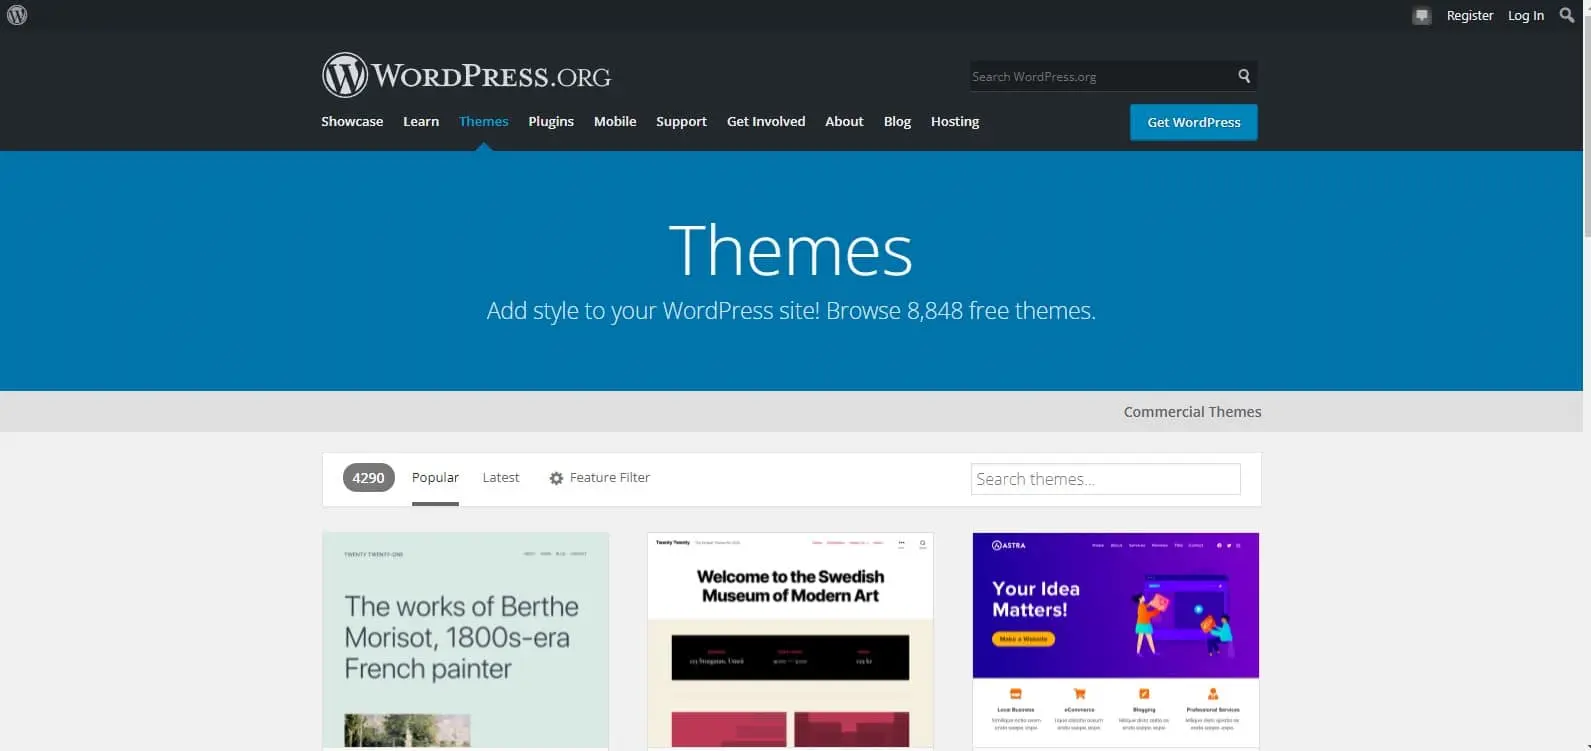 A preview of a website with WordPress themes, blue header and theme examples below